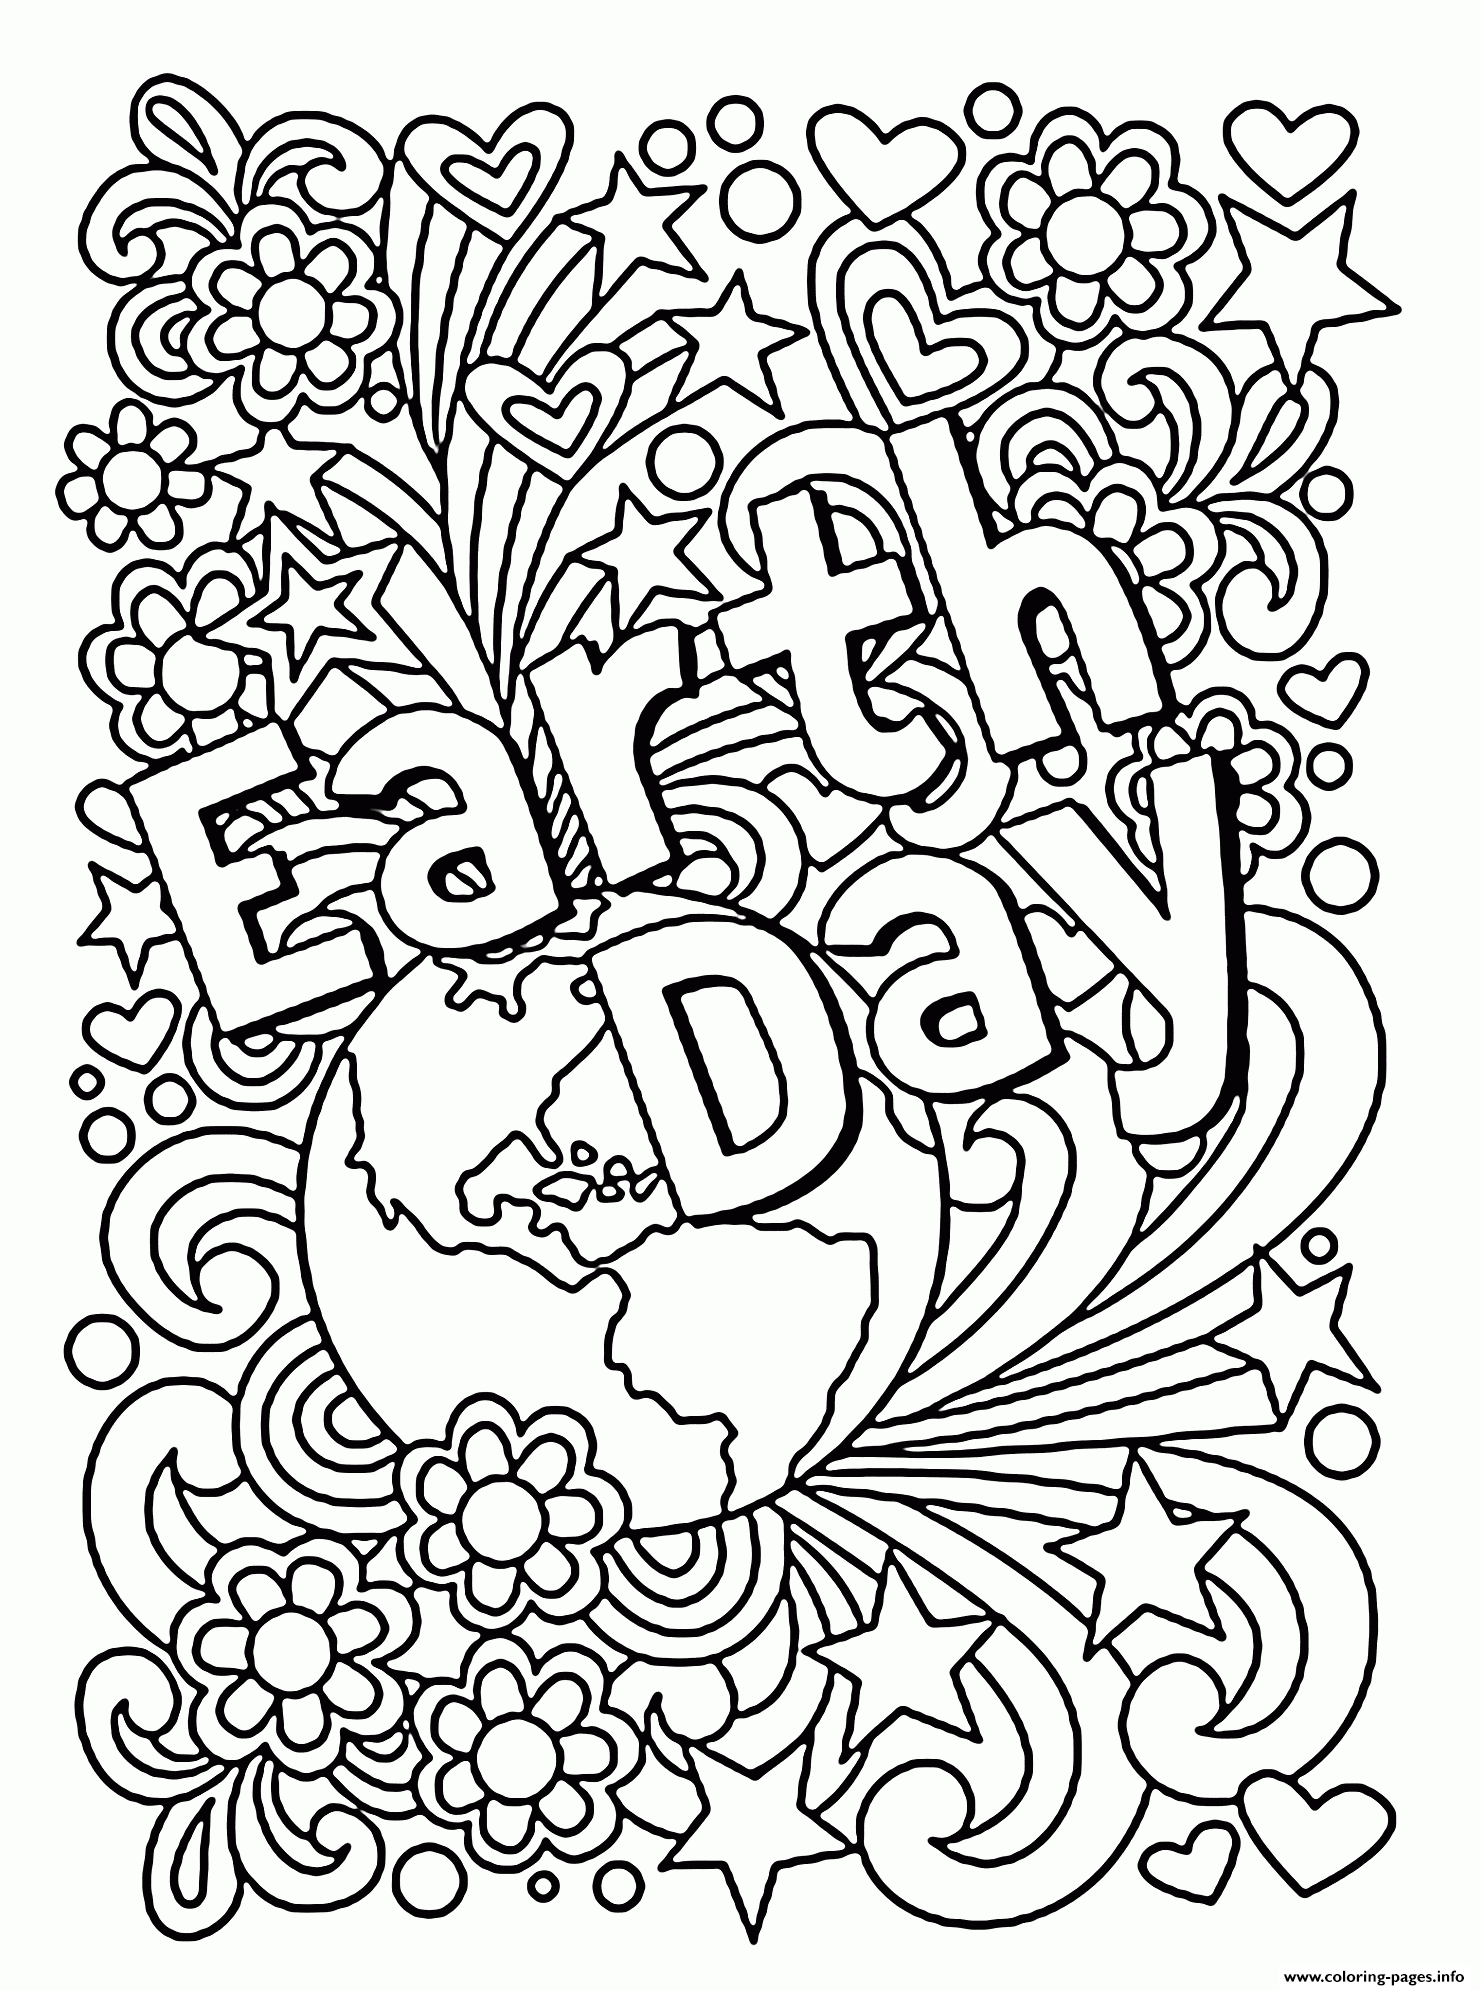 Earth Day Doodle coloring